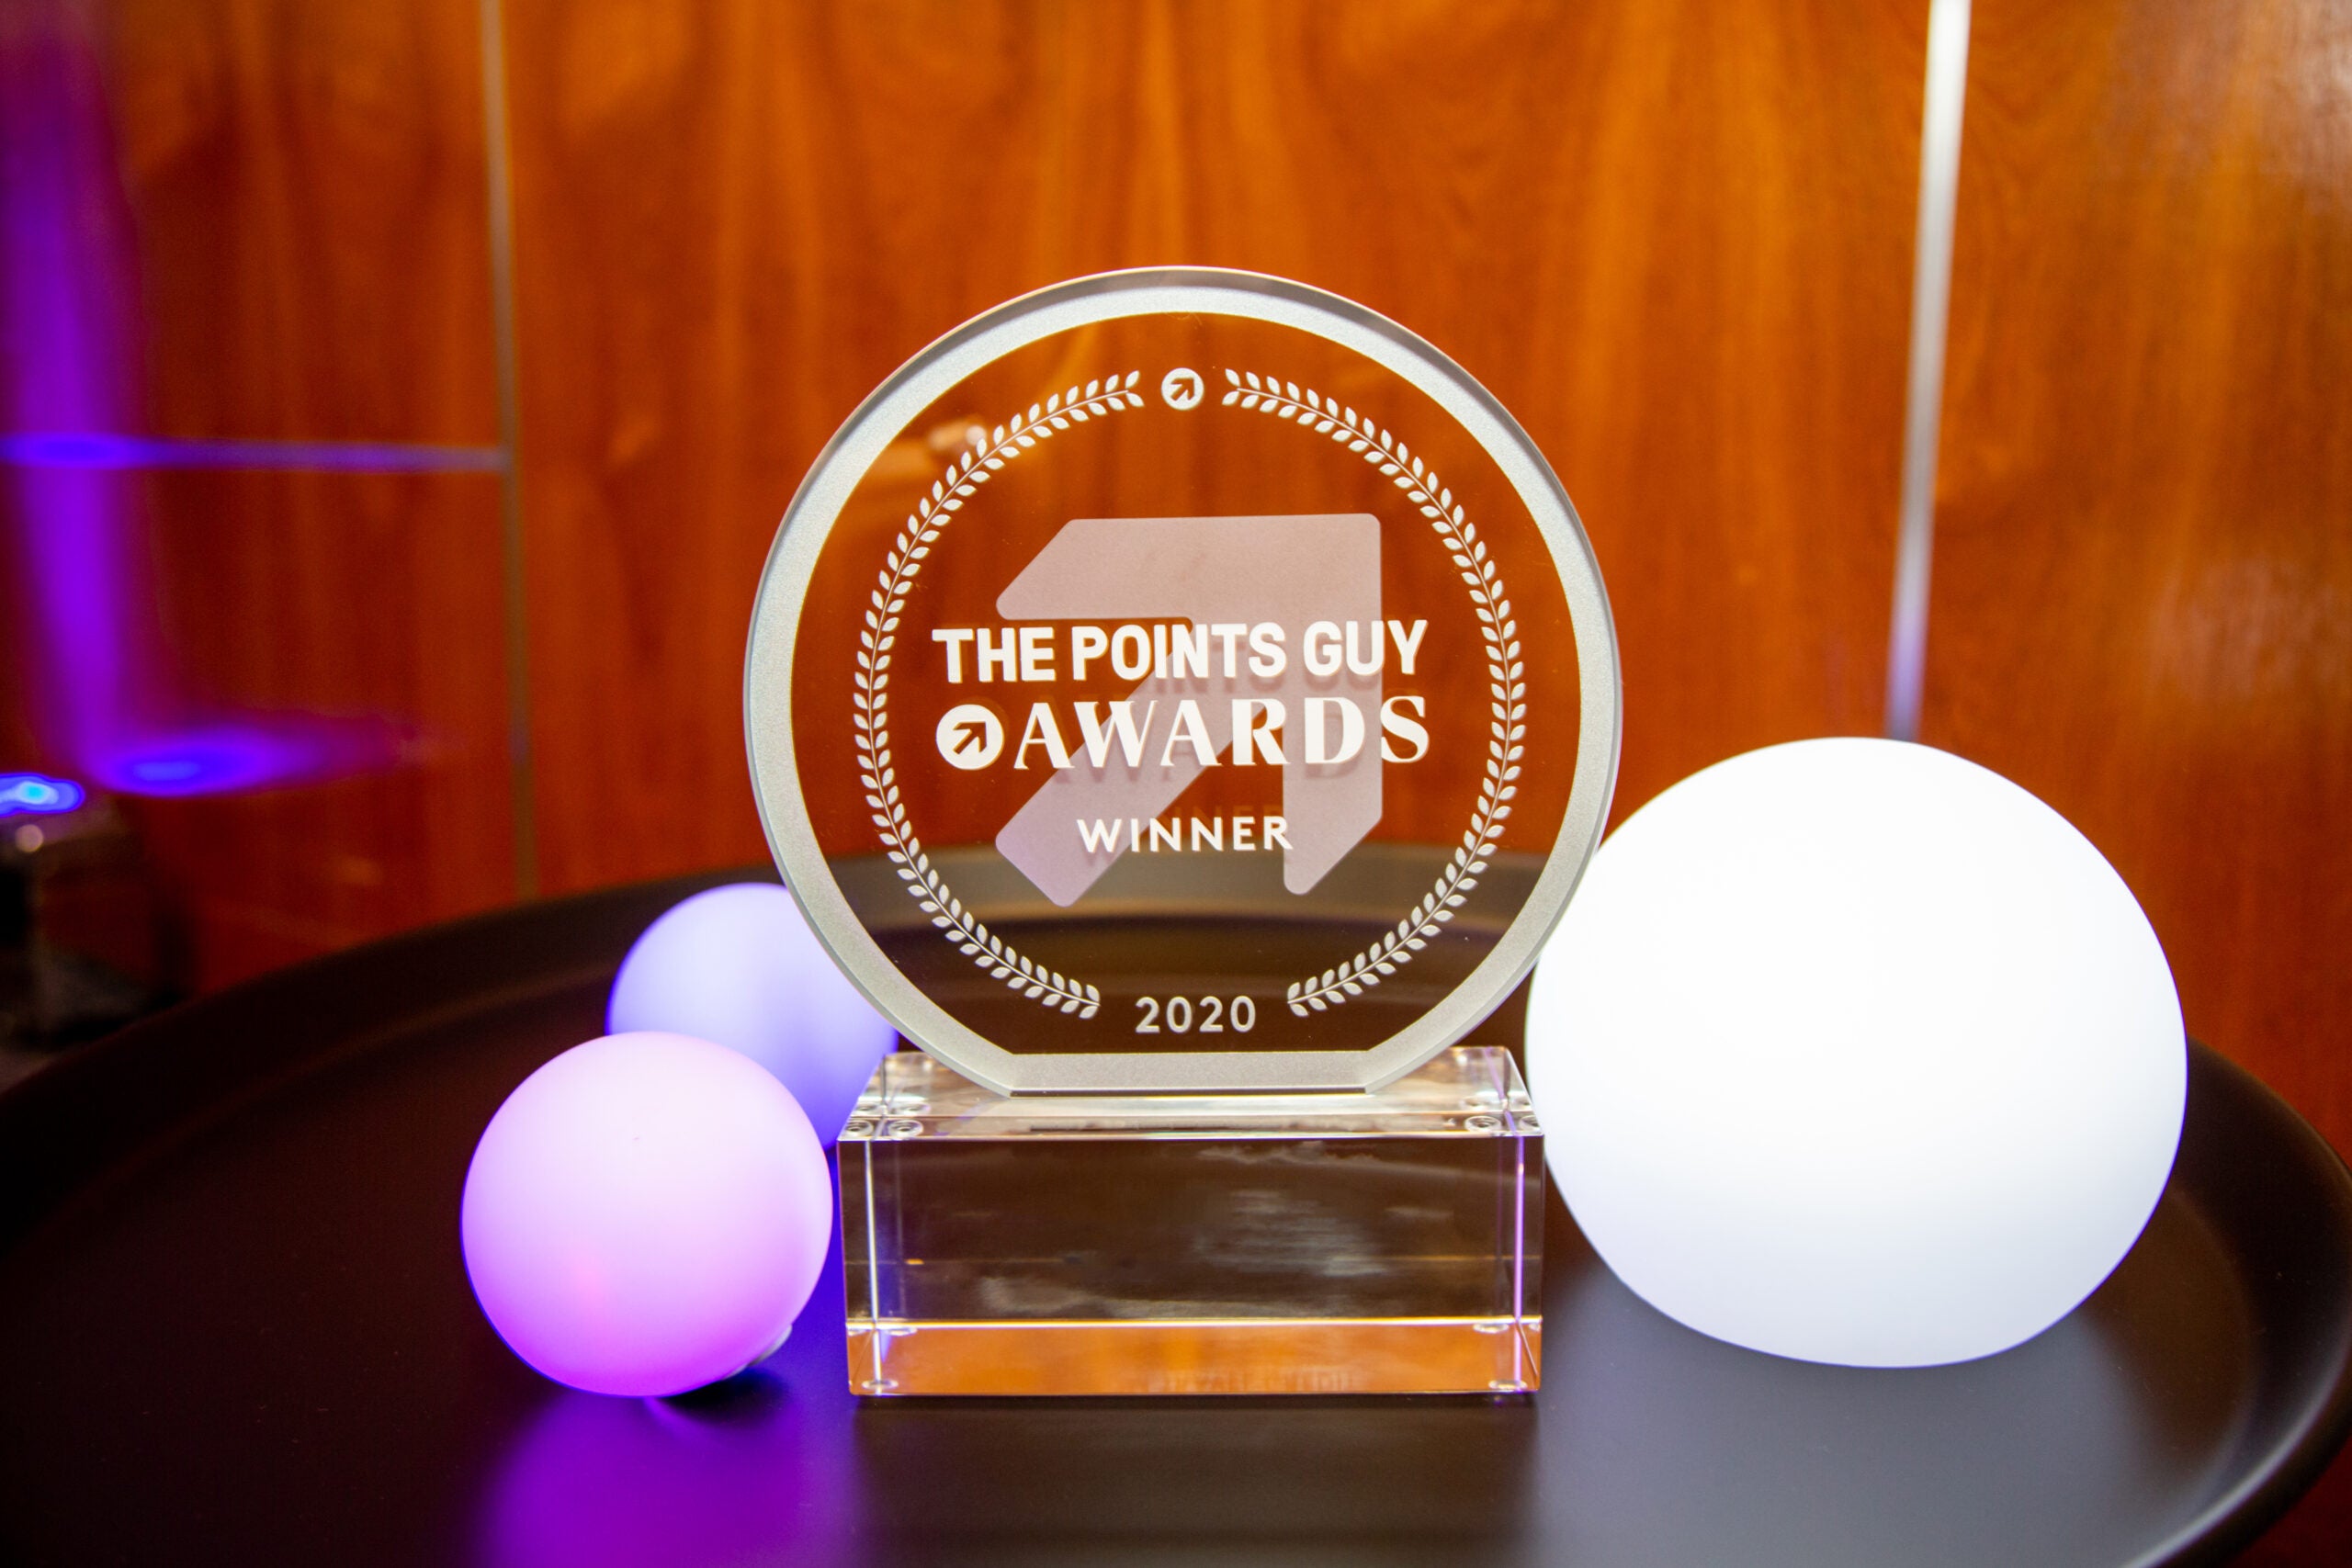 A picture of the 2020 TPG Awards trophy